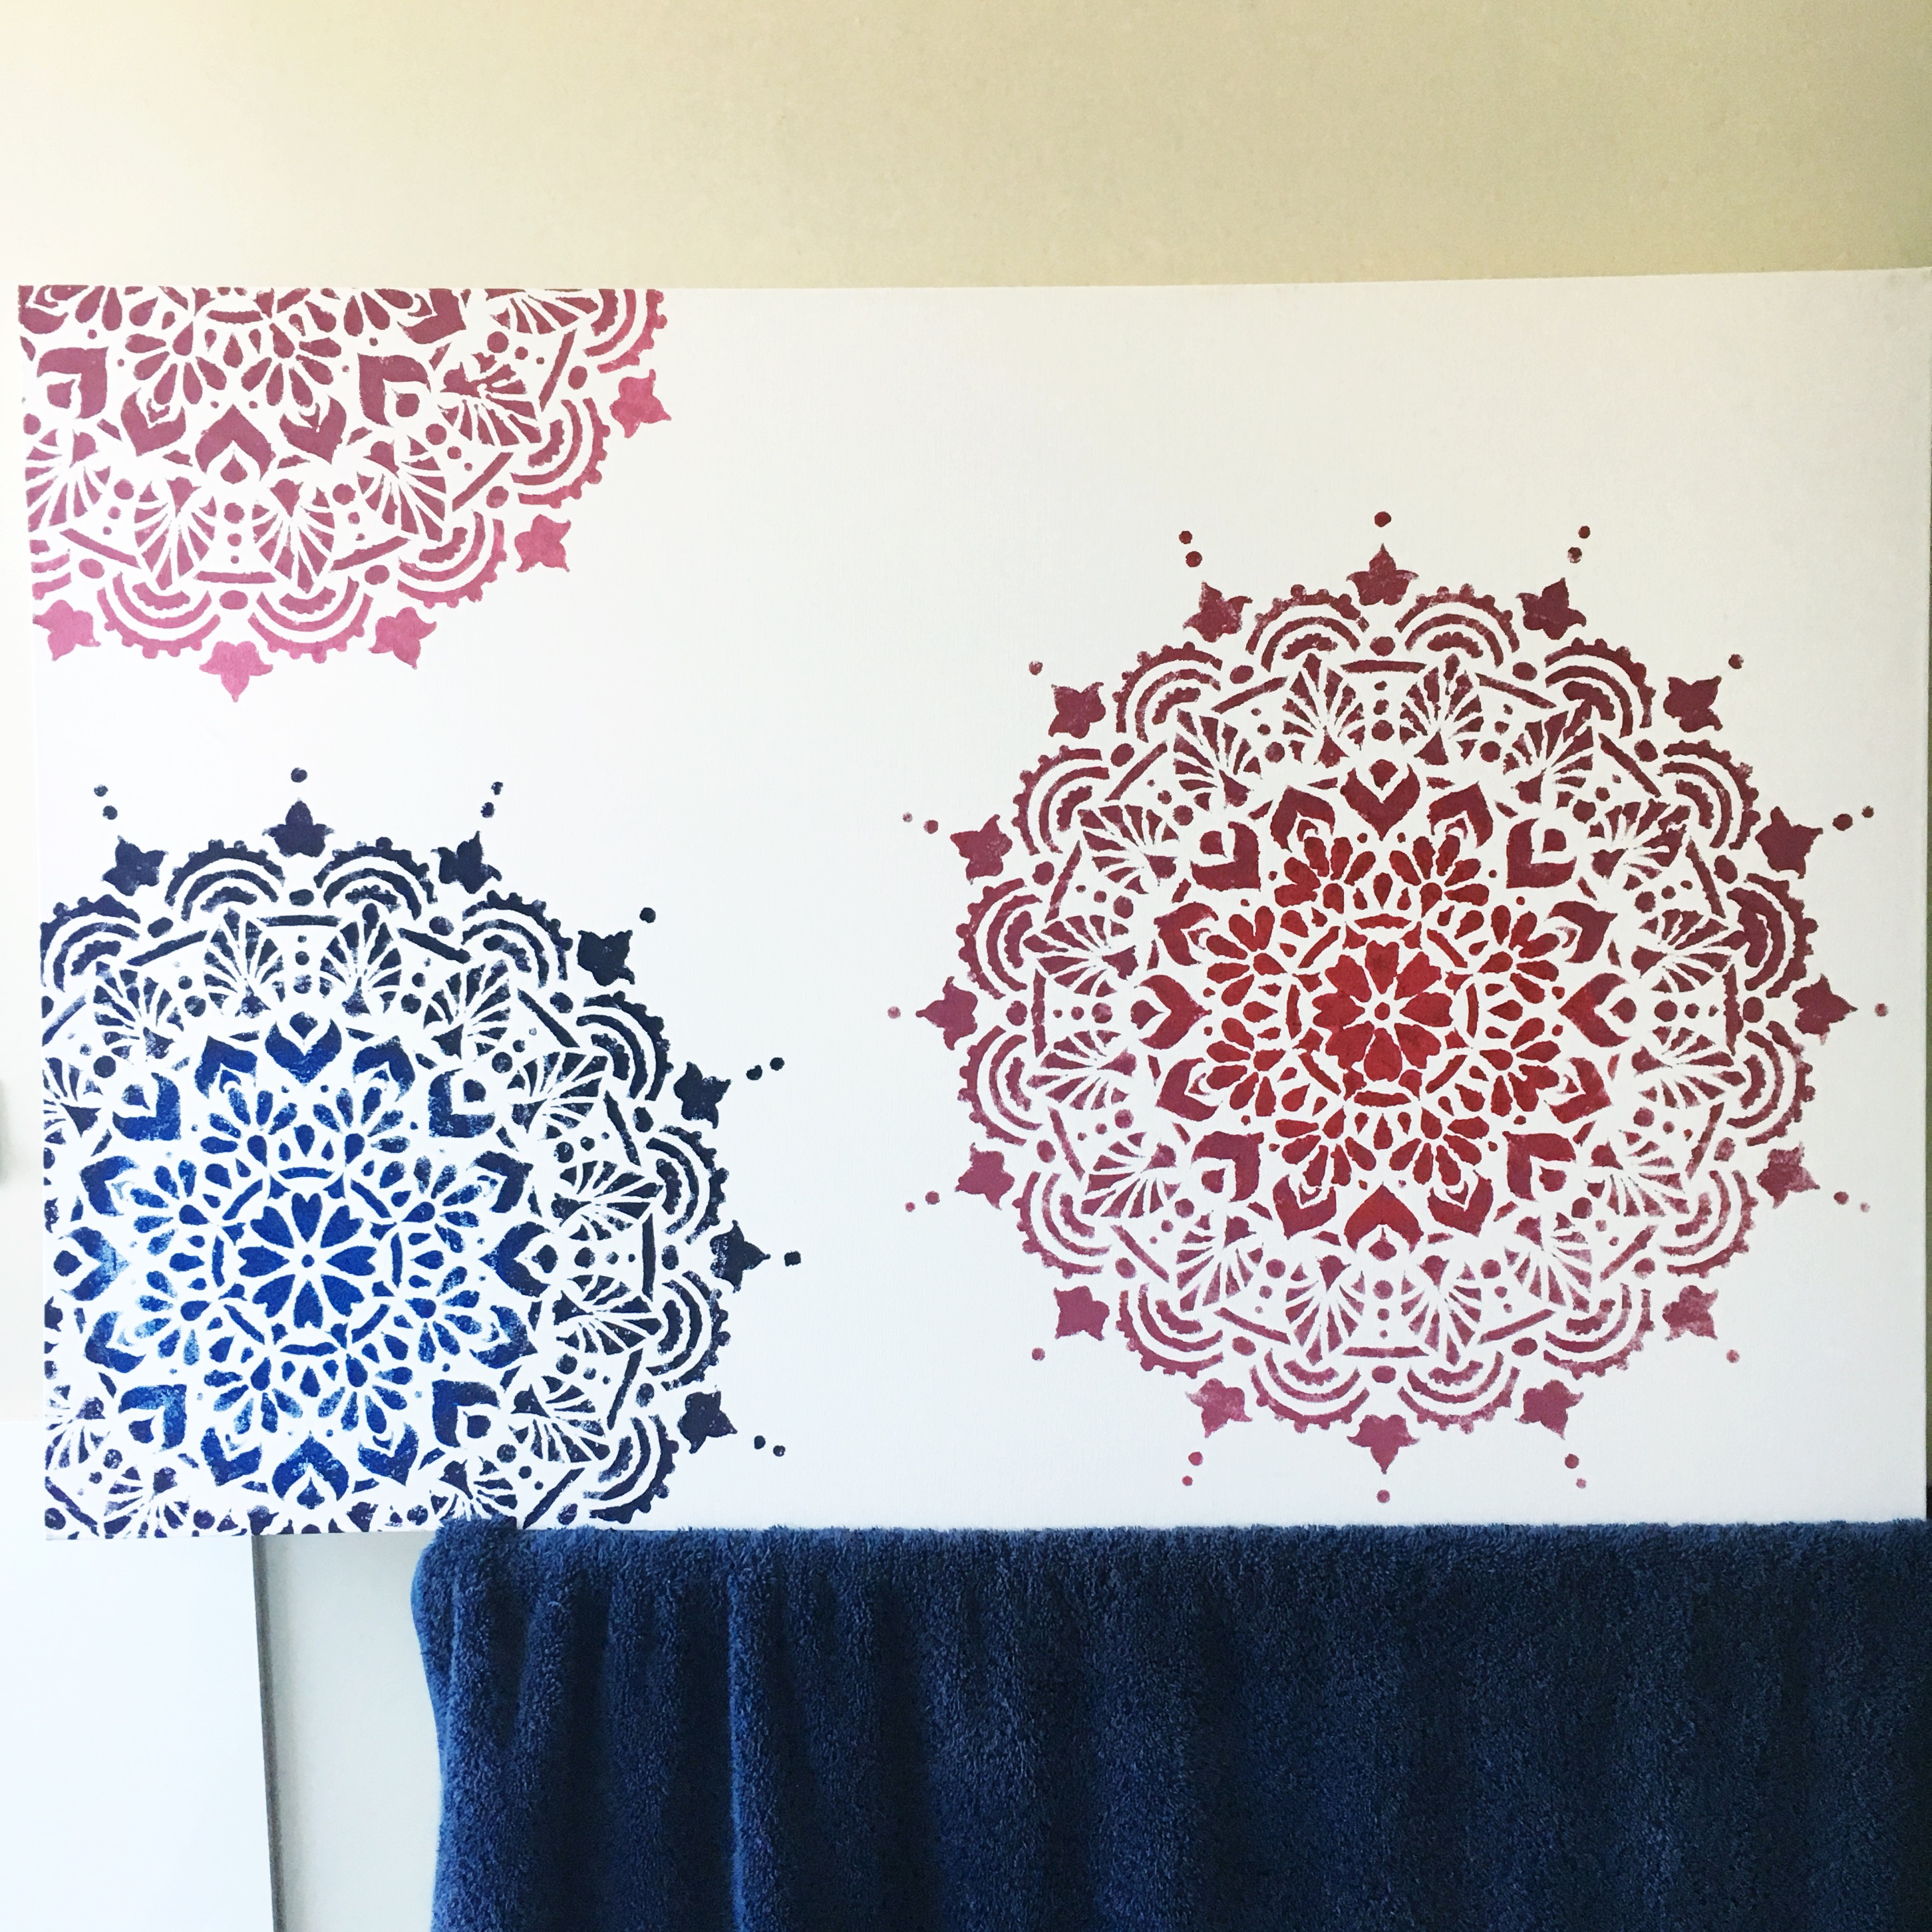 Reusable Stencil Mandala Painting Template with 3 Pieces Painting Pen for Floor Wall Tile Fabric Furniture Wood Painting 9 Pieces 11.4 x 11.4 Inch Large Mandala Stencil